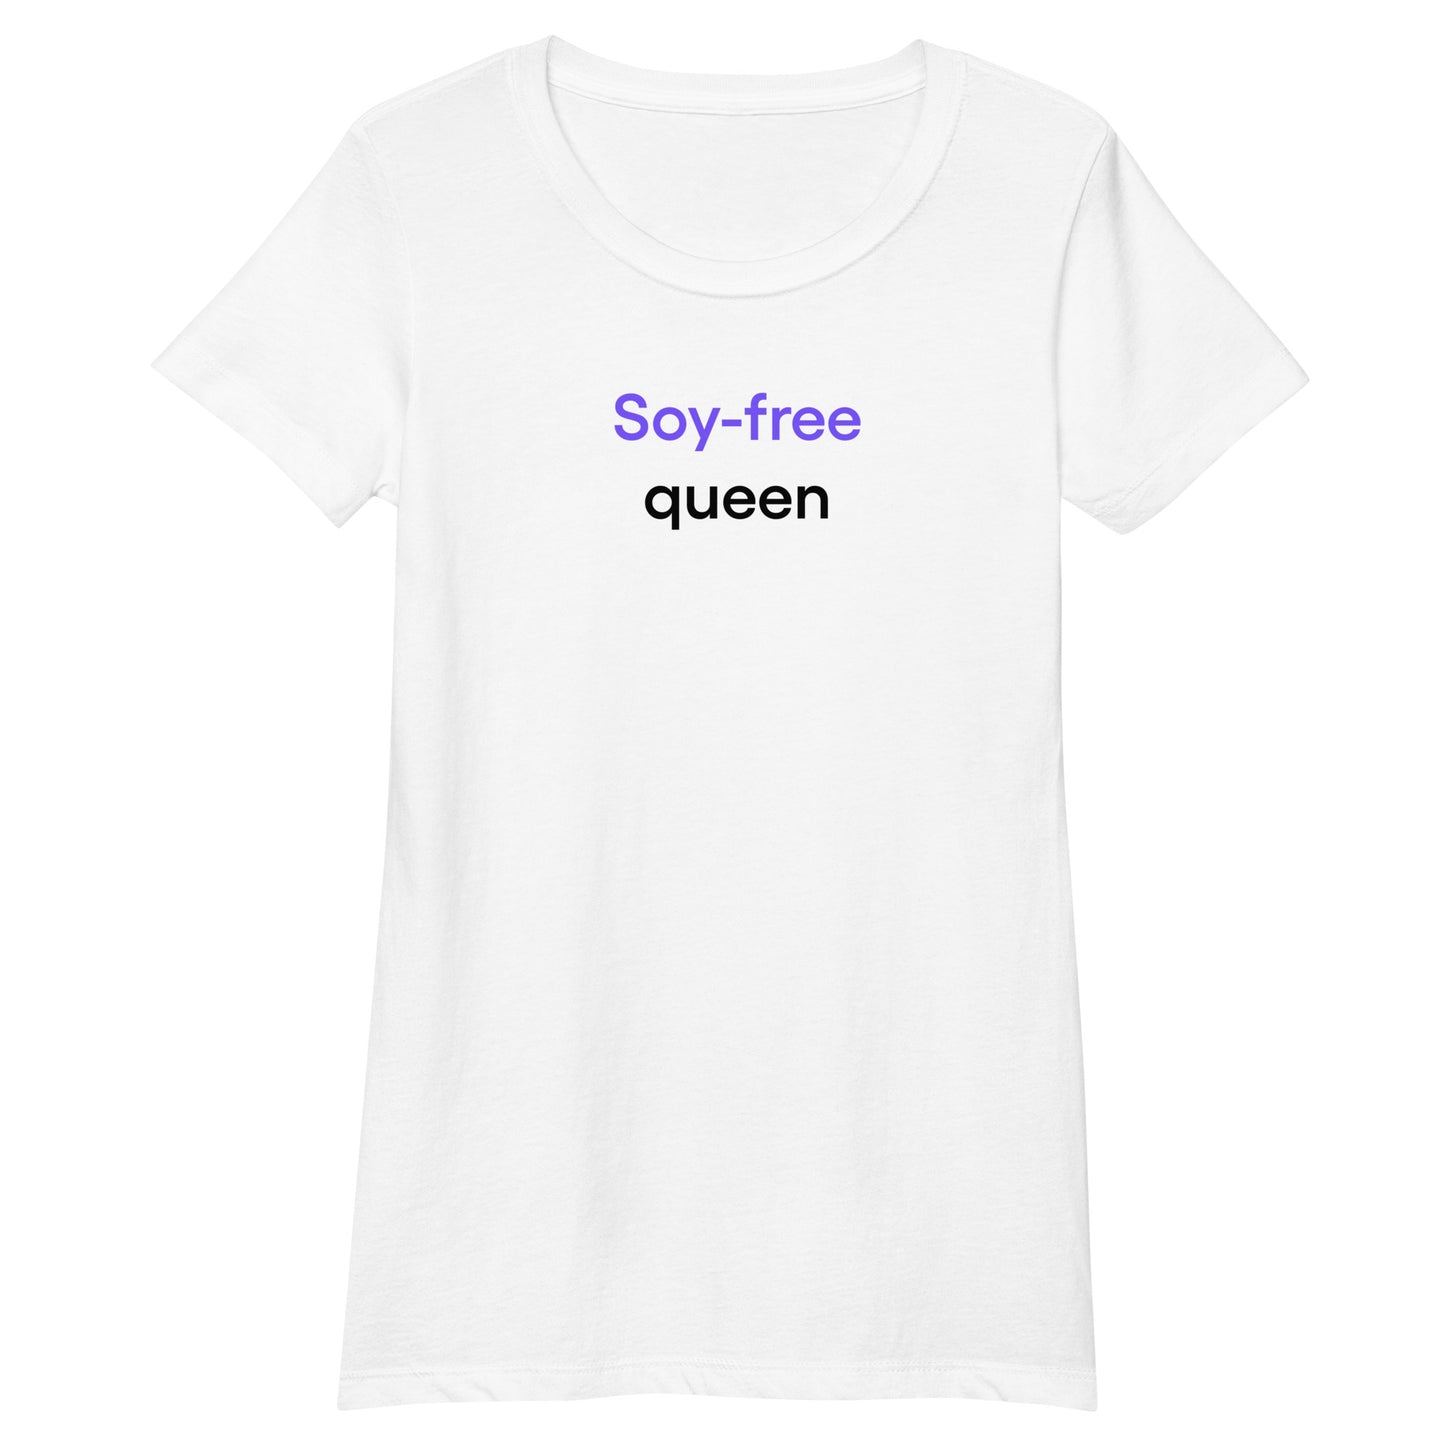 Soy-free queen | Women’s fitted t-shirt